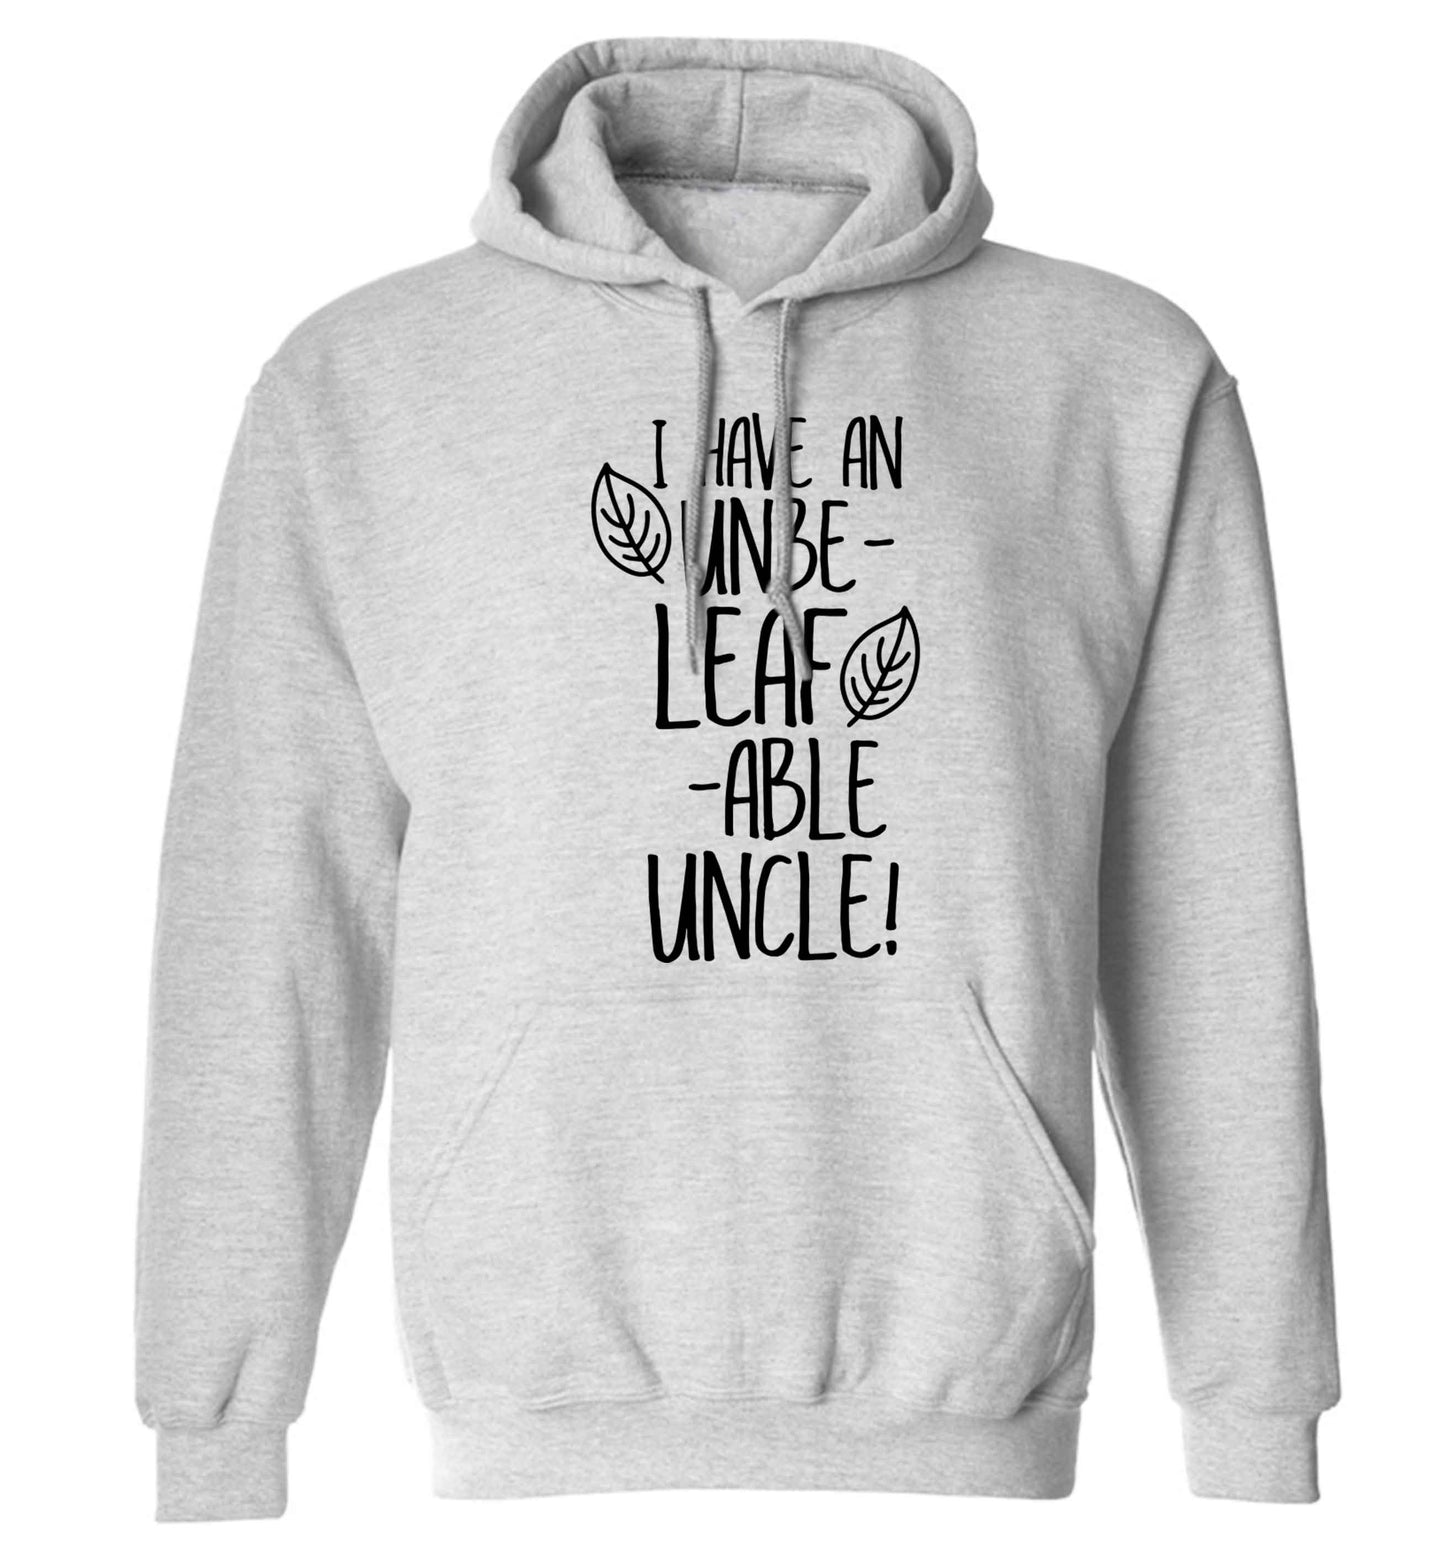 I have an unbe-leaf-able uncle adults unisex grey hoodie 2XL